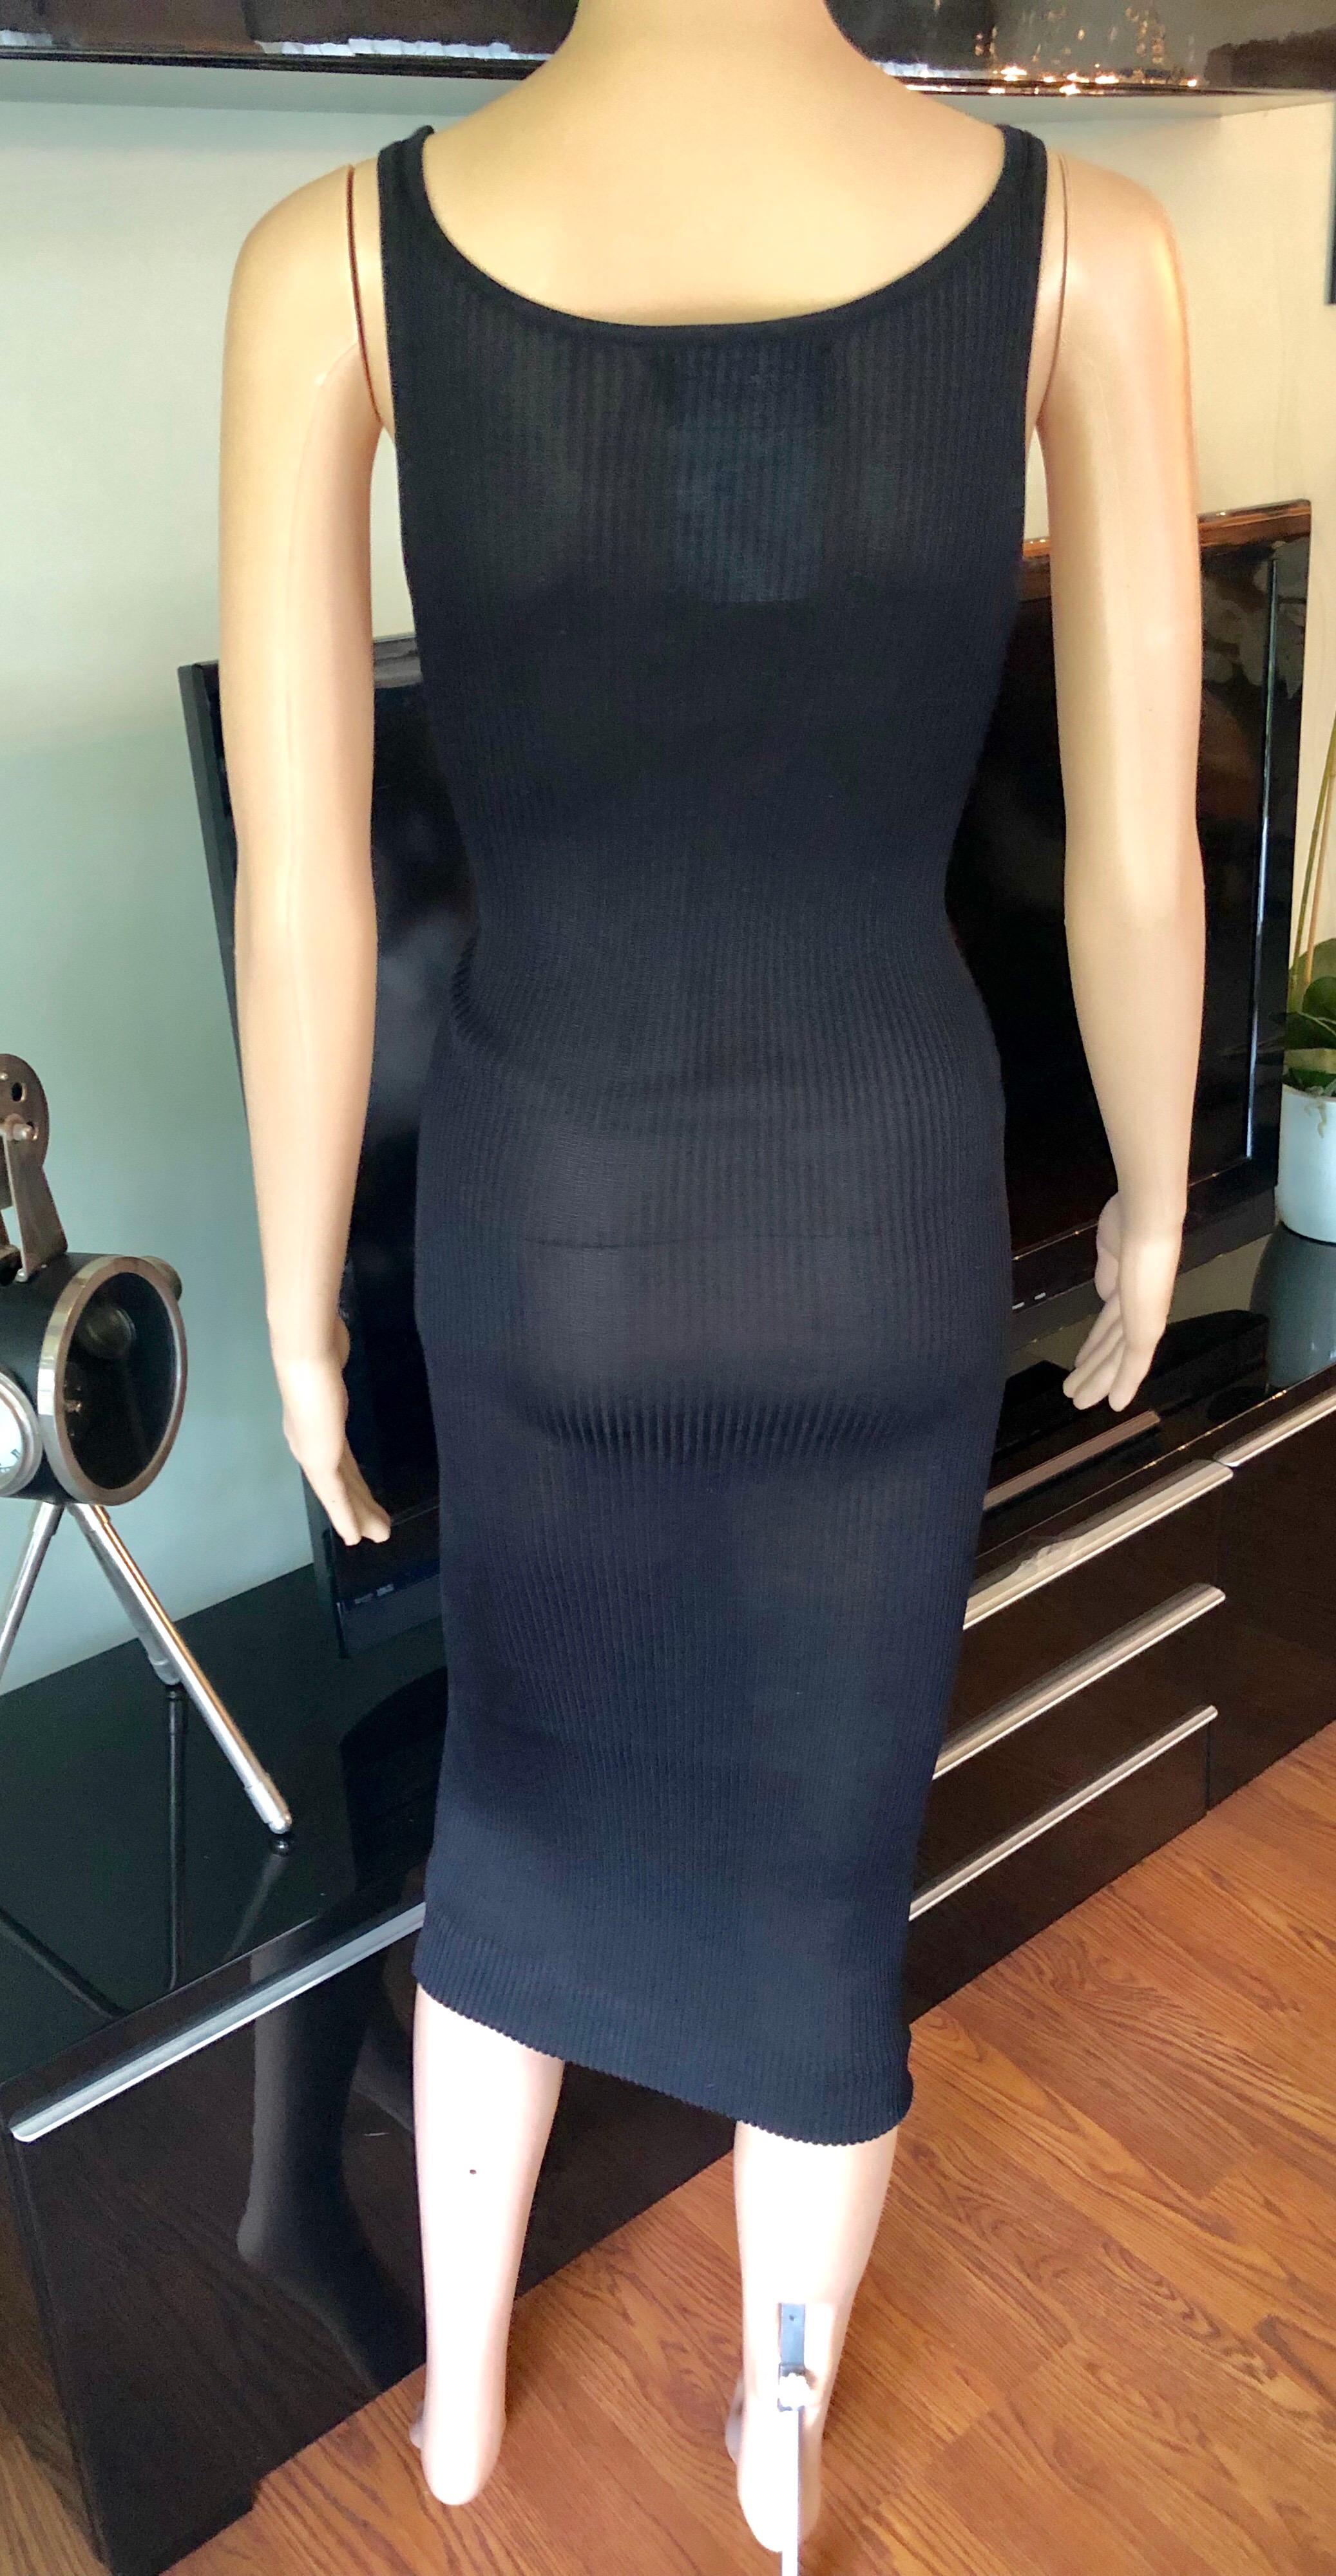 Chanel Vintage Sheer Silk Knitted Bodycon Black Dress FR 34

Chanel Boutique Vintage sheer silk rib knit dress featuring scoop neck and single interlocking CC embroidery at left shoulder.
